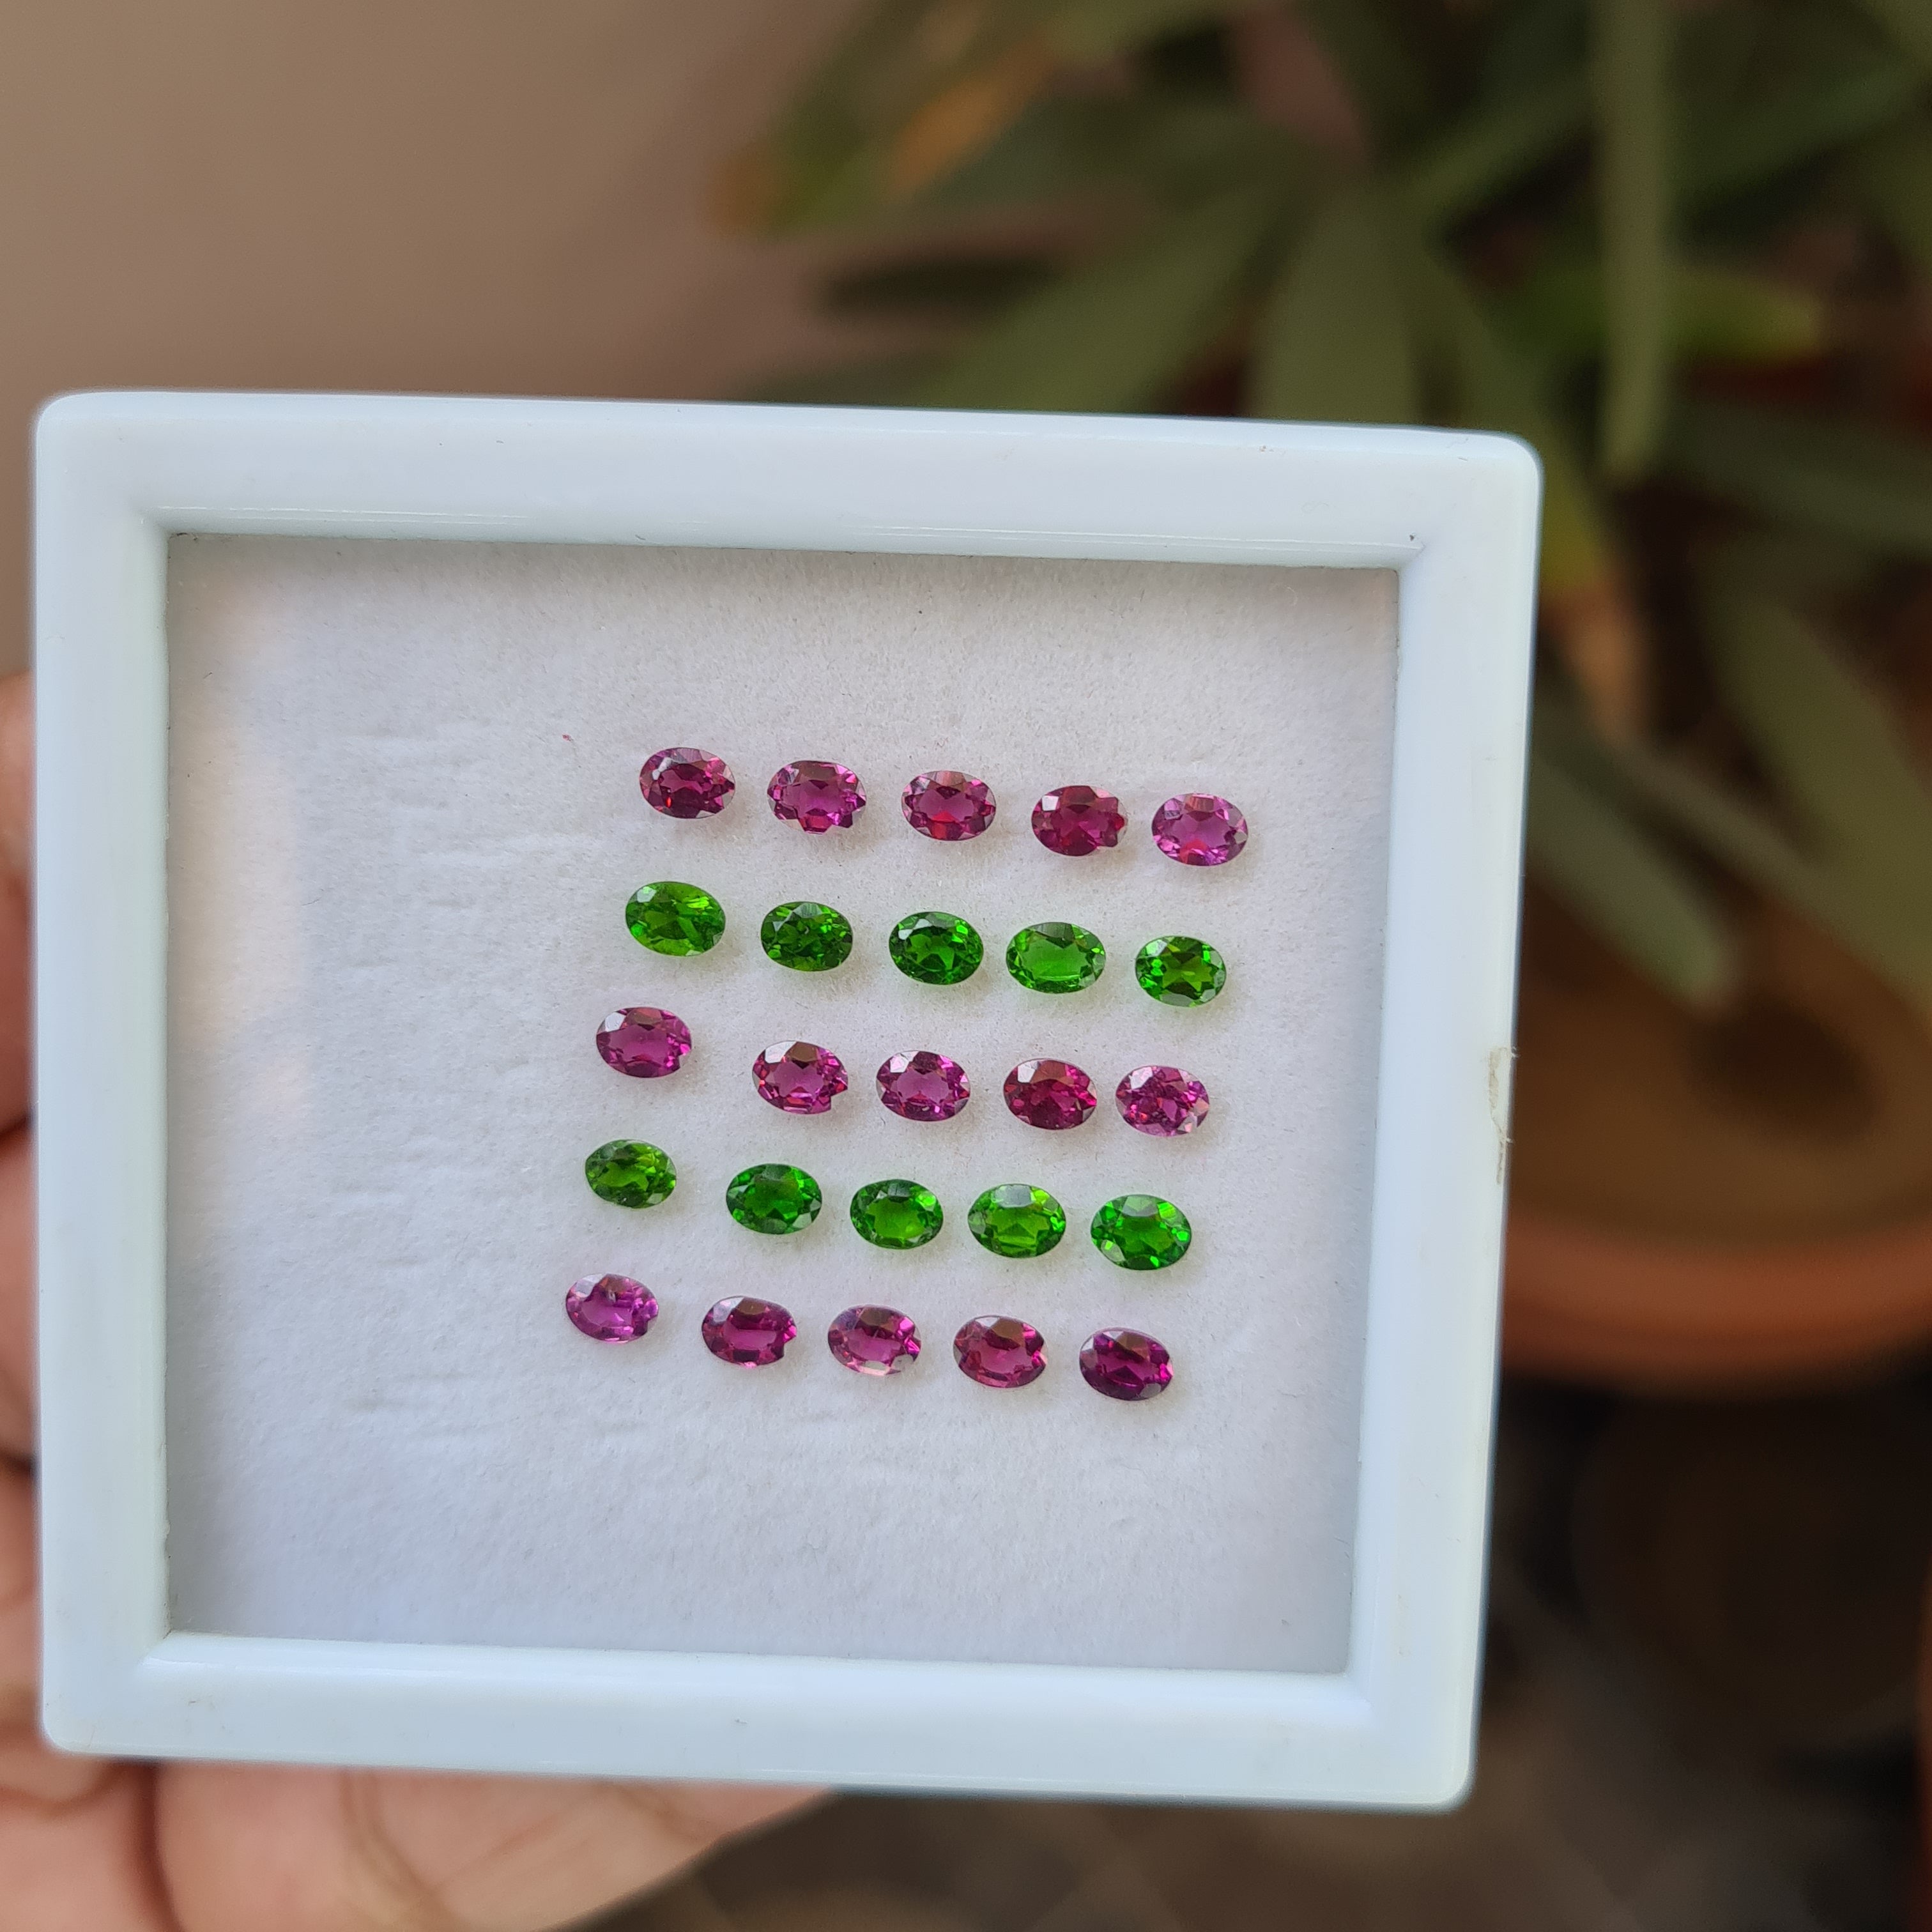 25 Pieces Natural Garnet Faceted Green and Pink Oval Shape , Size: 4x3mm - The LabradoriteKing